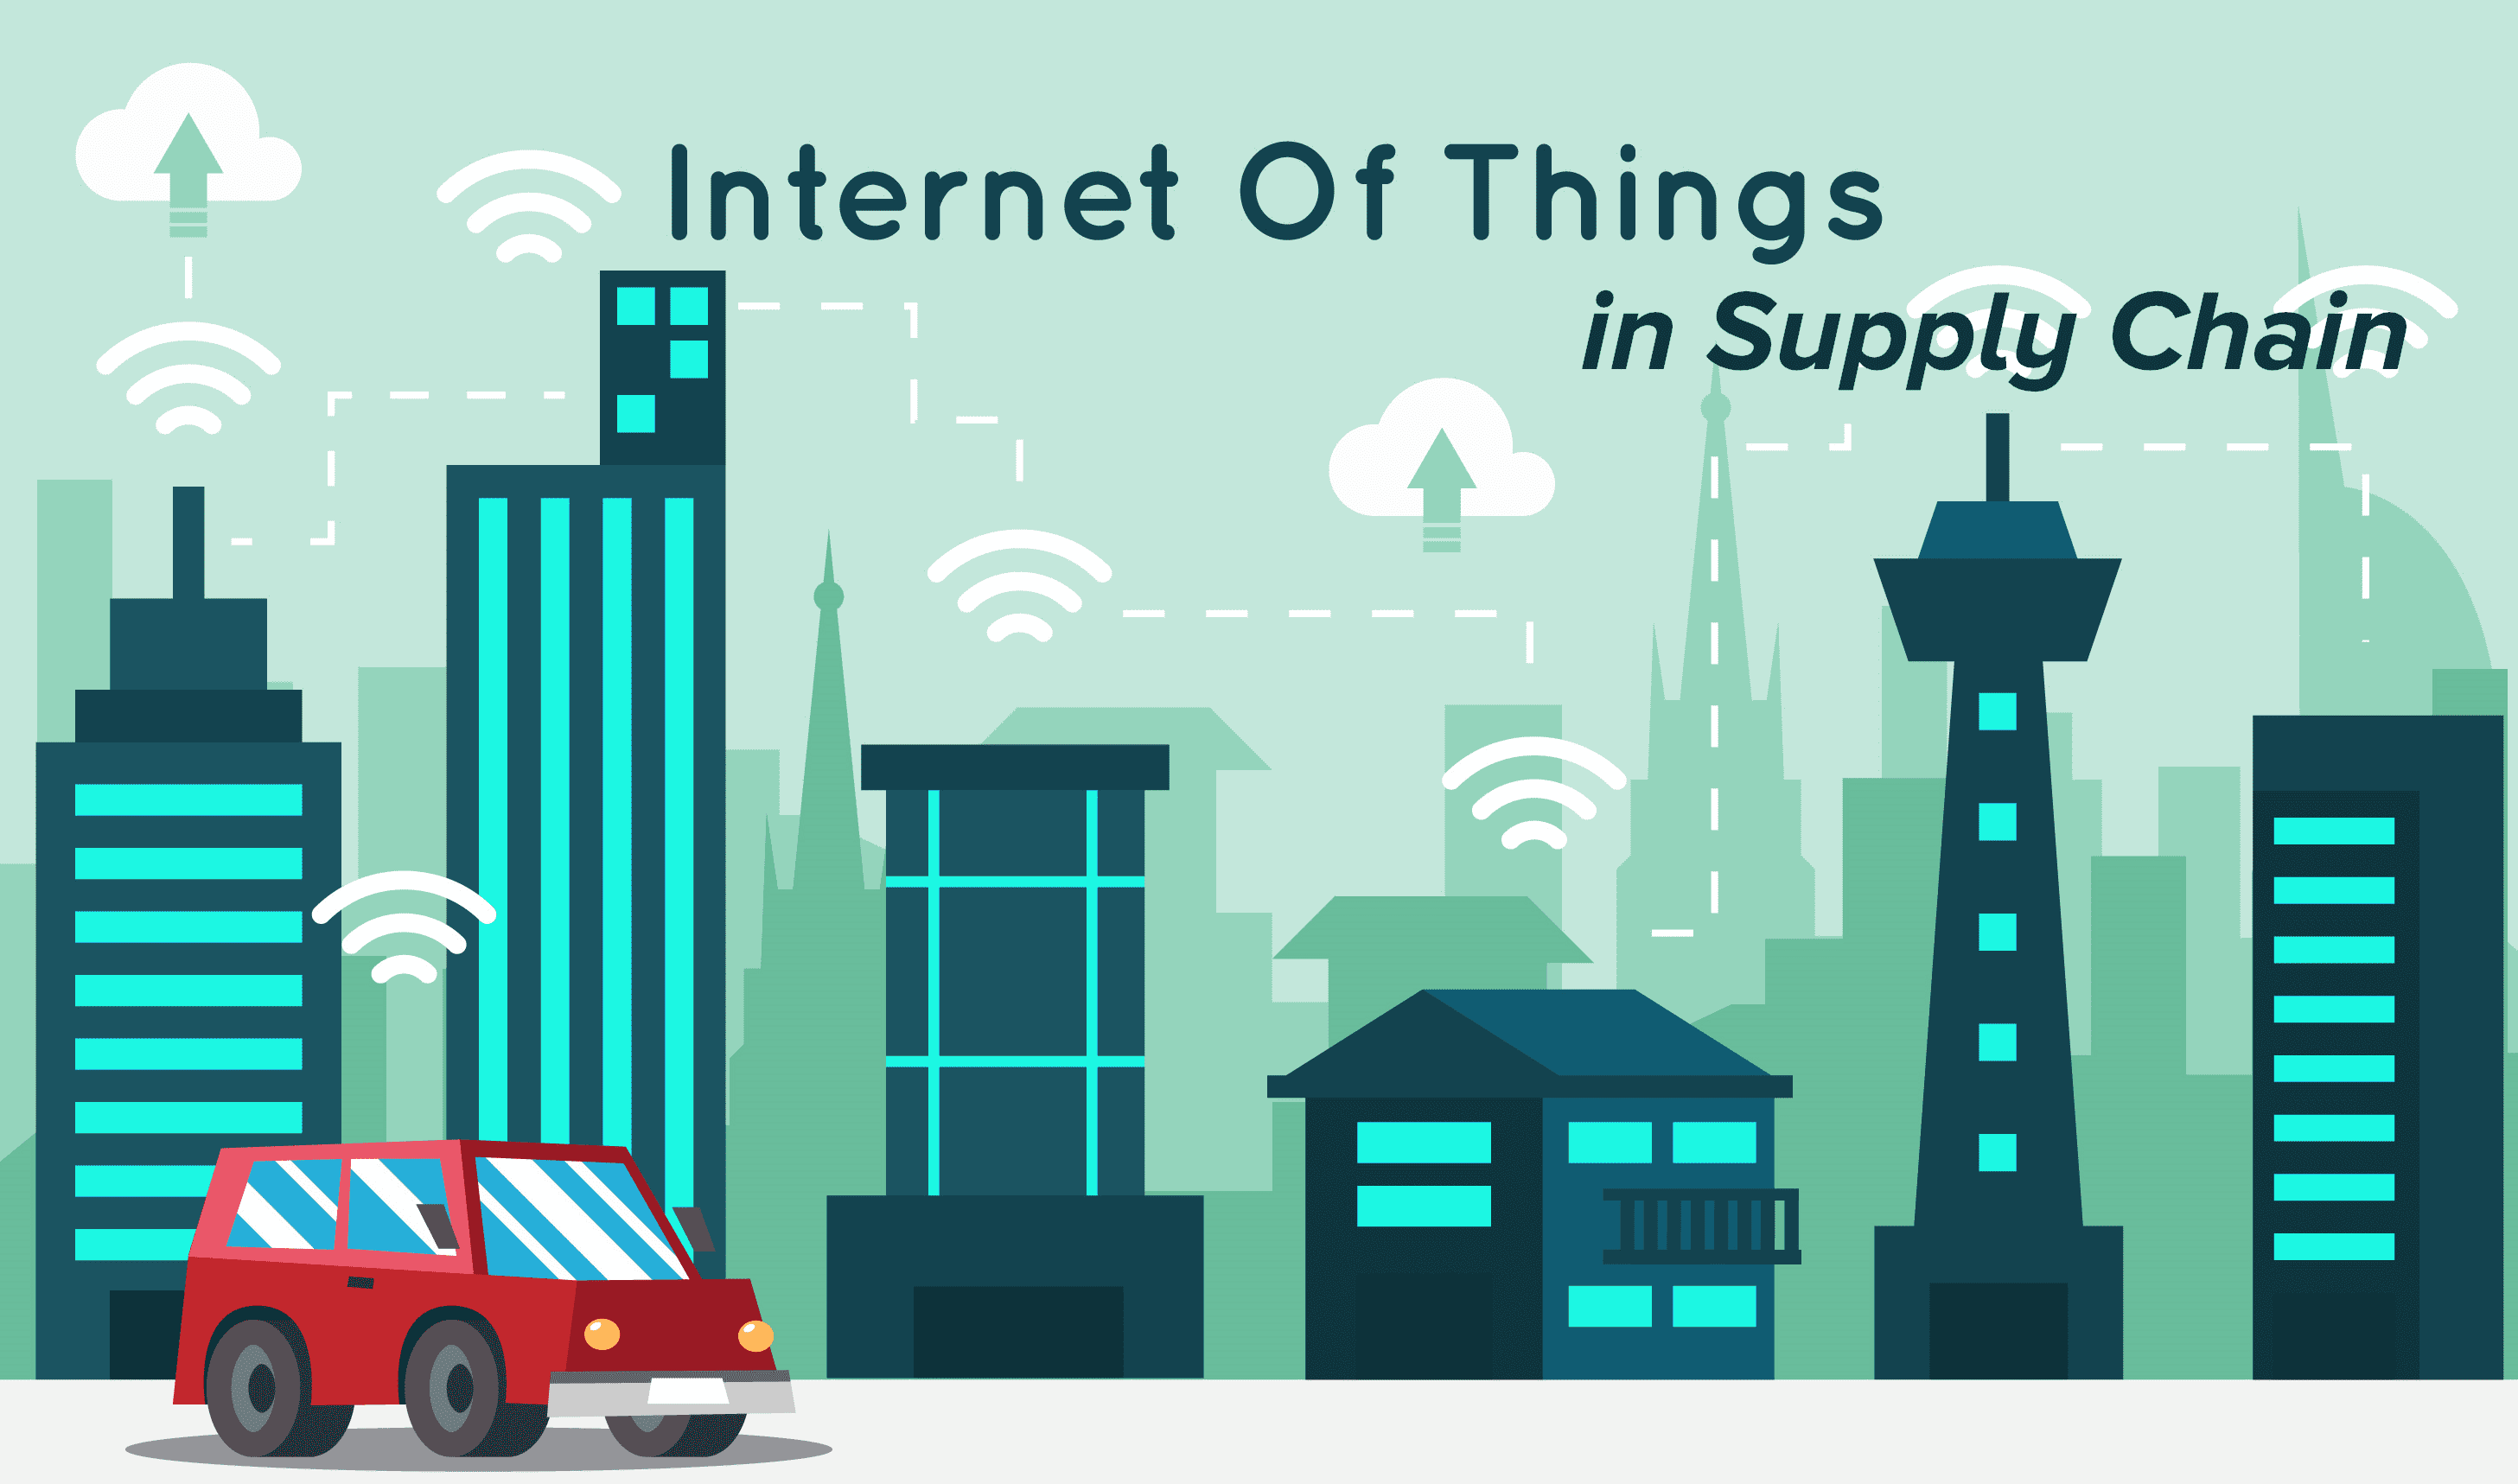 The Internet of Things (IoT) and its impact on Supply Chain